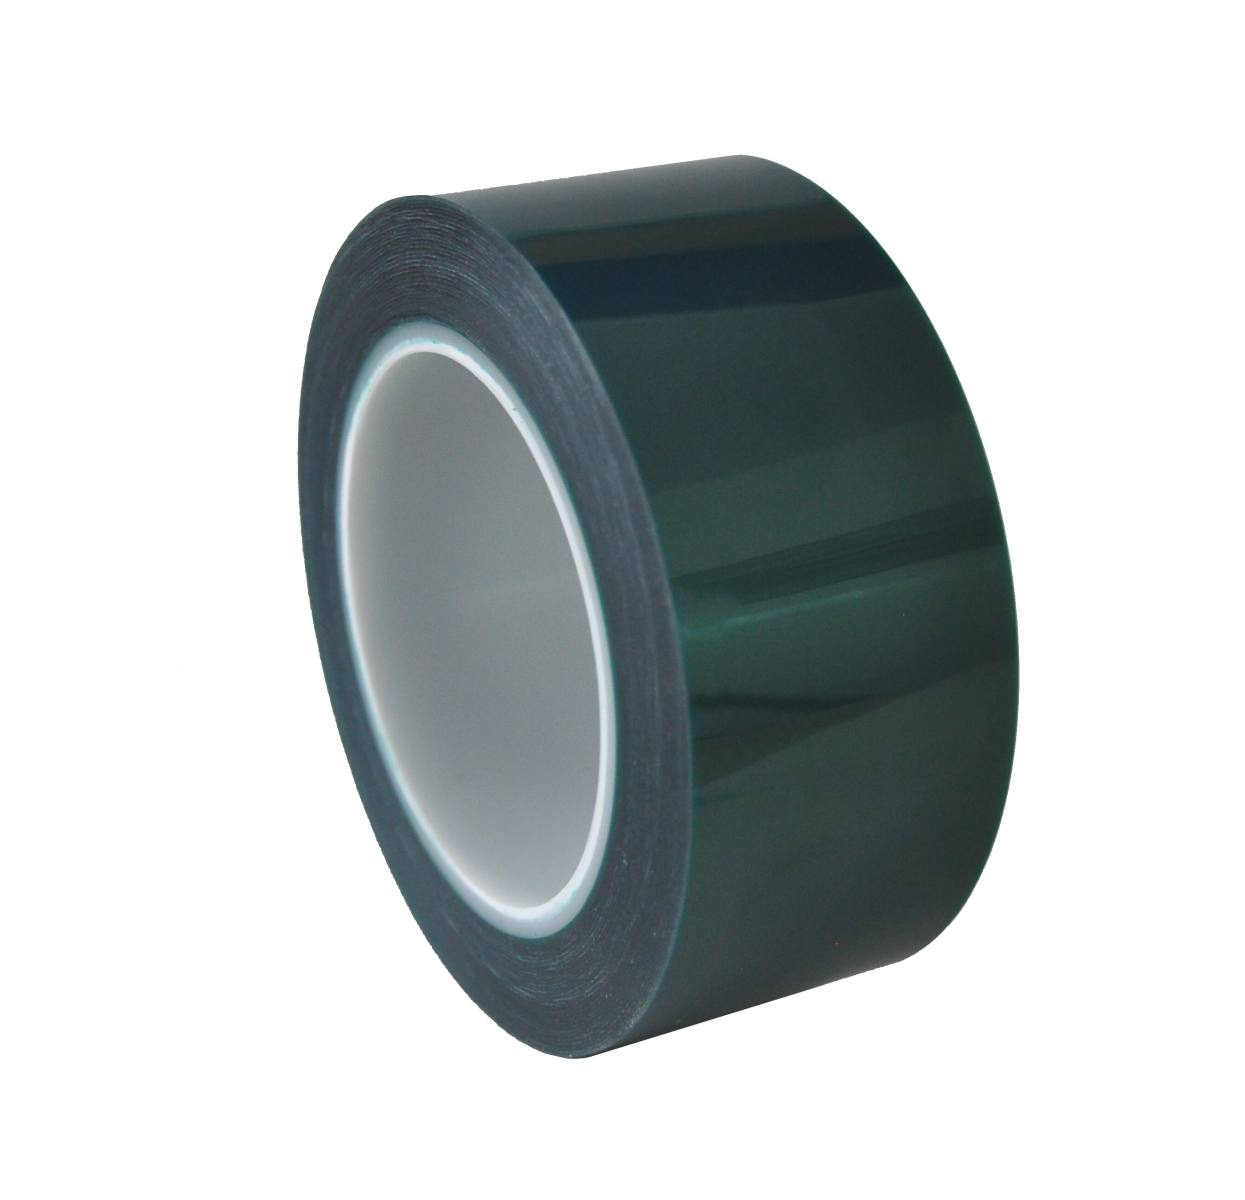 S-K-S 208G polyester adhesive tape, 19mmx66m, green